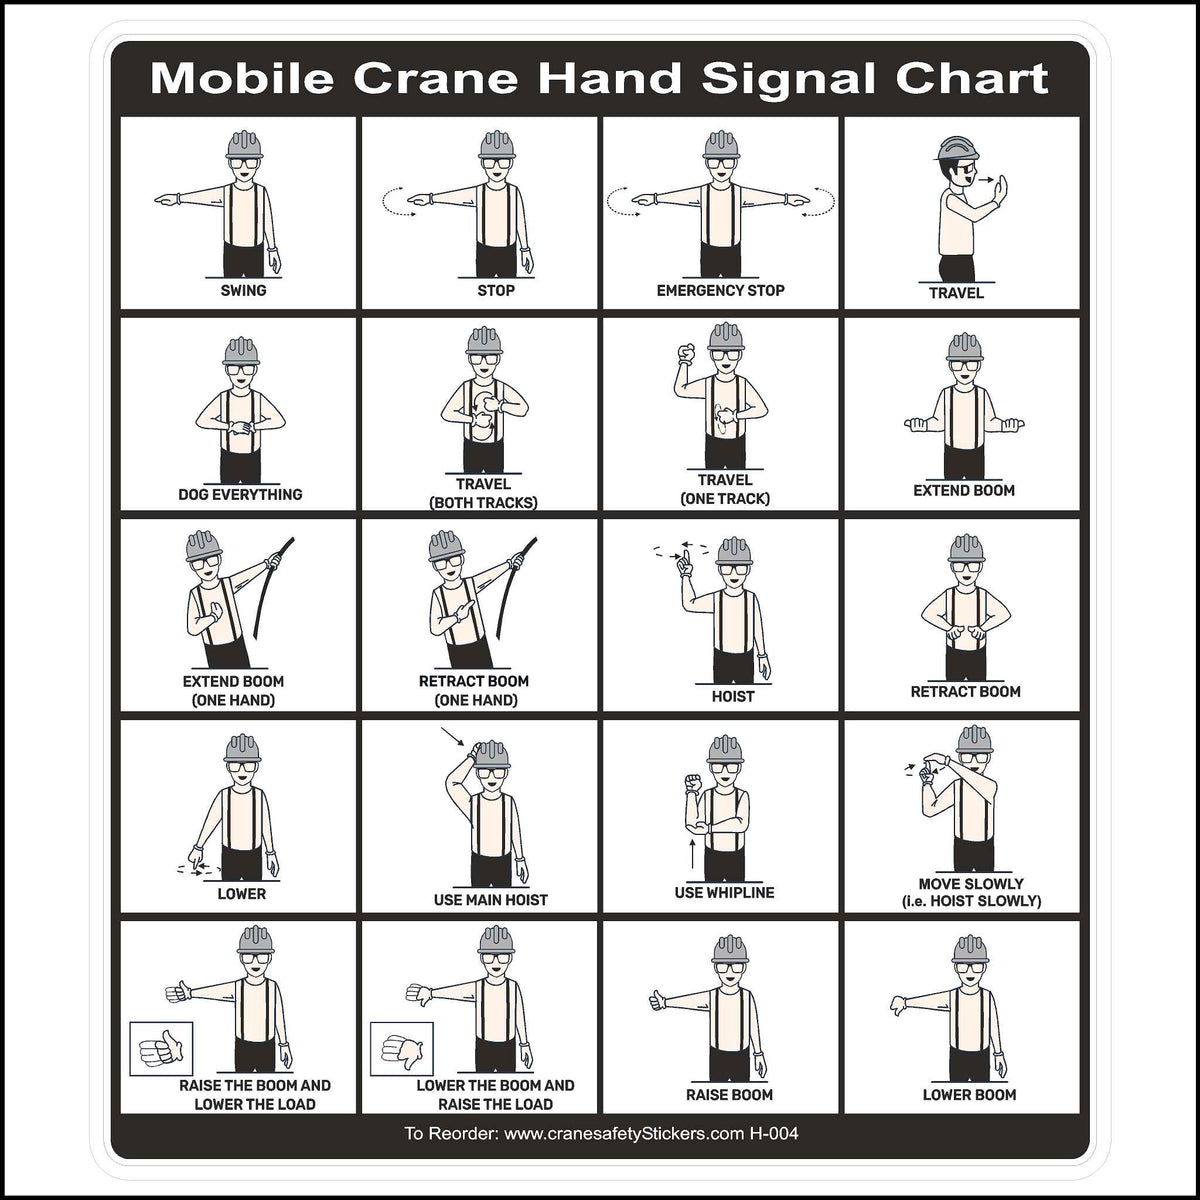 7 Inches Wide by 8 inches Tall Mobile Hand Signal Chart Printed with all 20 Hand Signals.